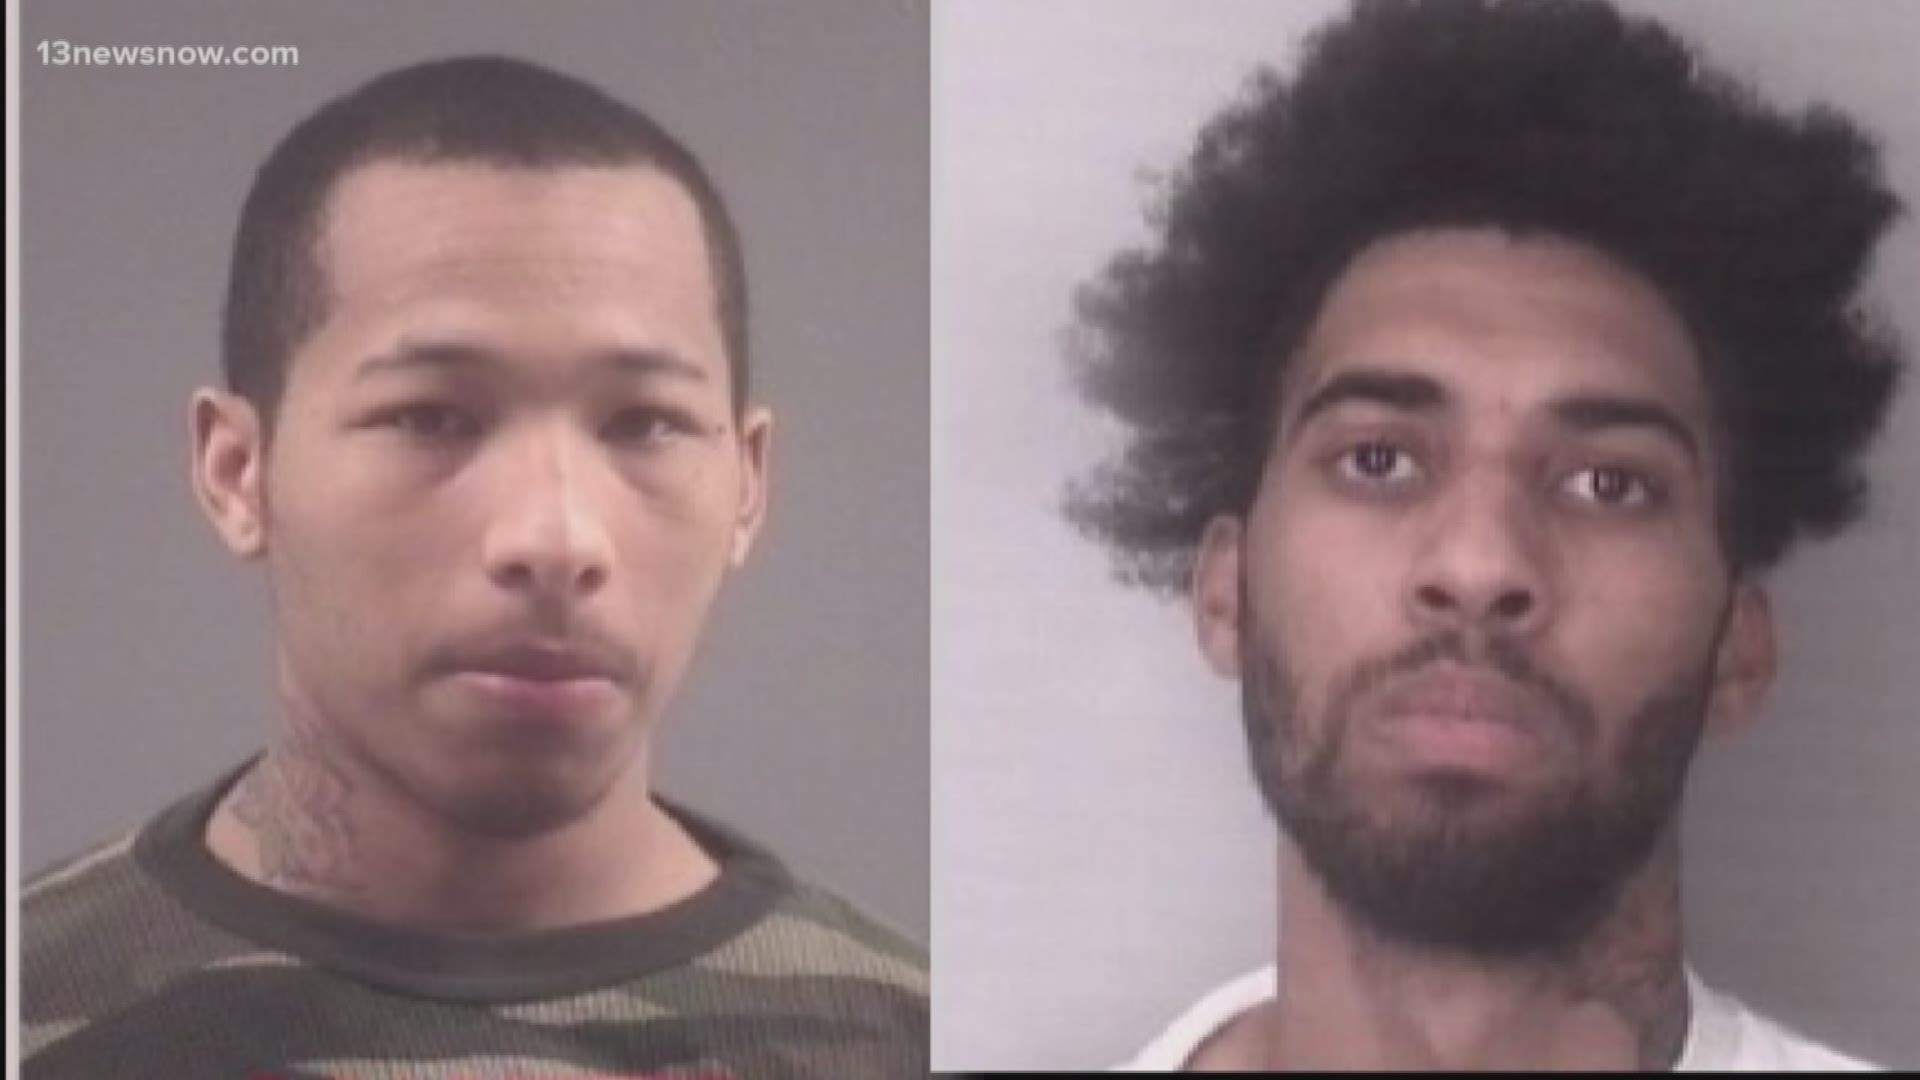 Police are asking for help to find 23-year-old Molek Alcantara and 22-year-old Daquan C. Reed. They are wanted for Monday's double shooting at MacArthur Center.